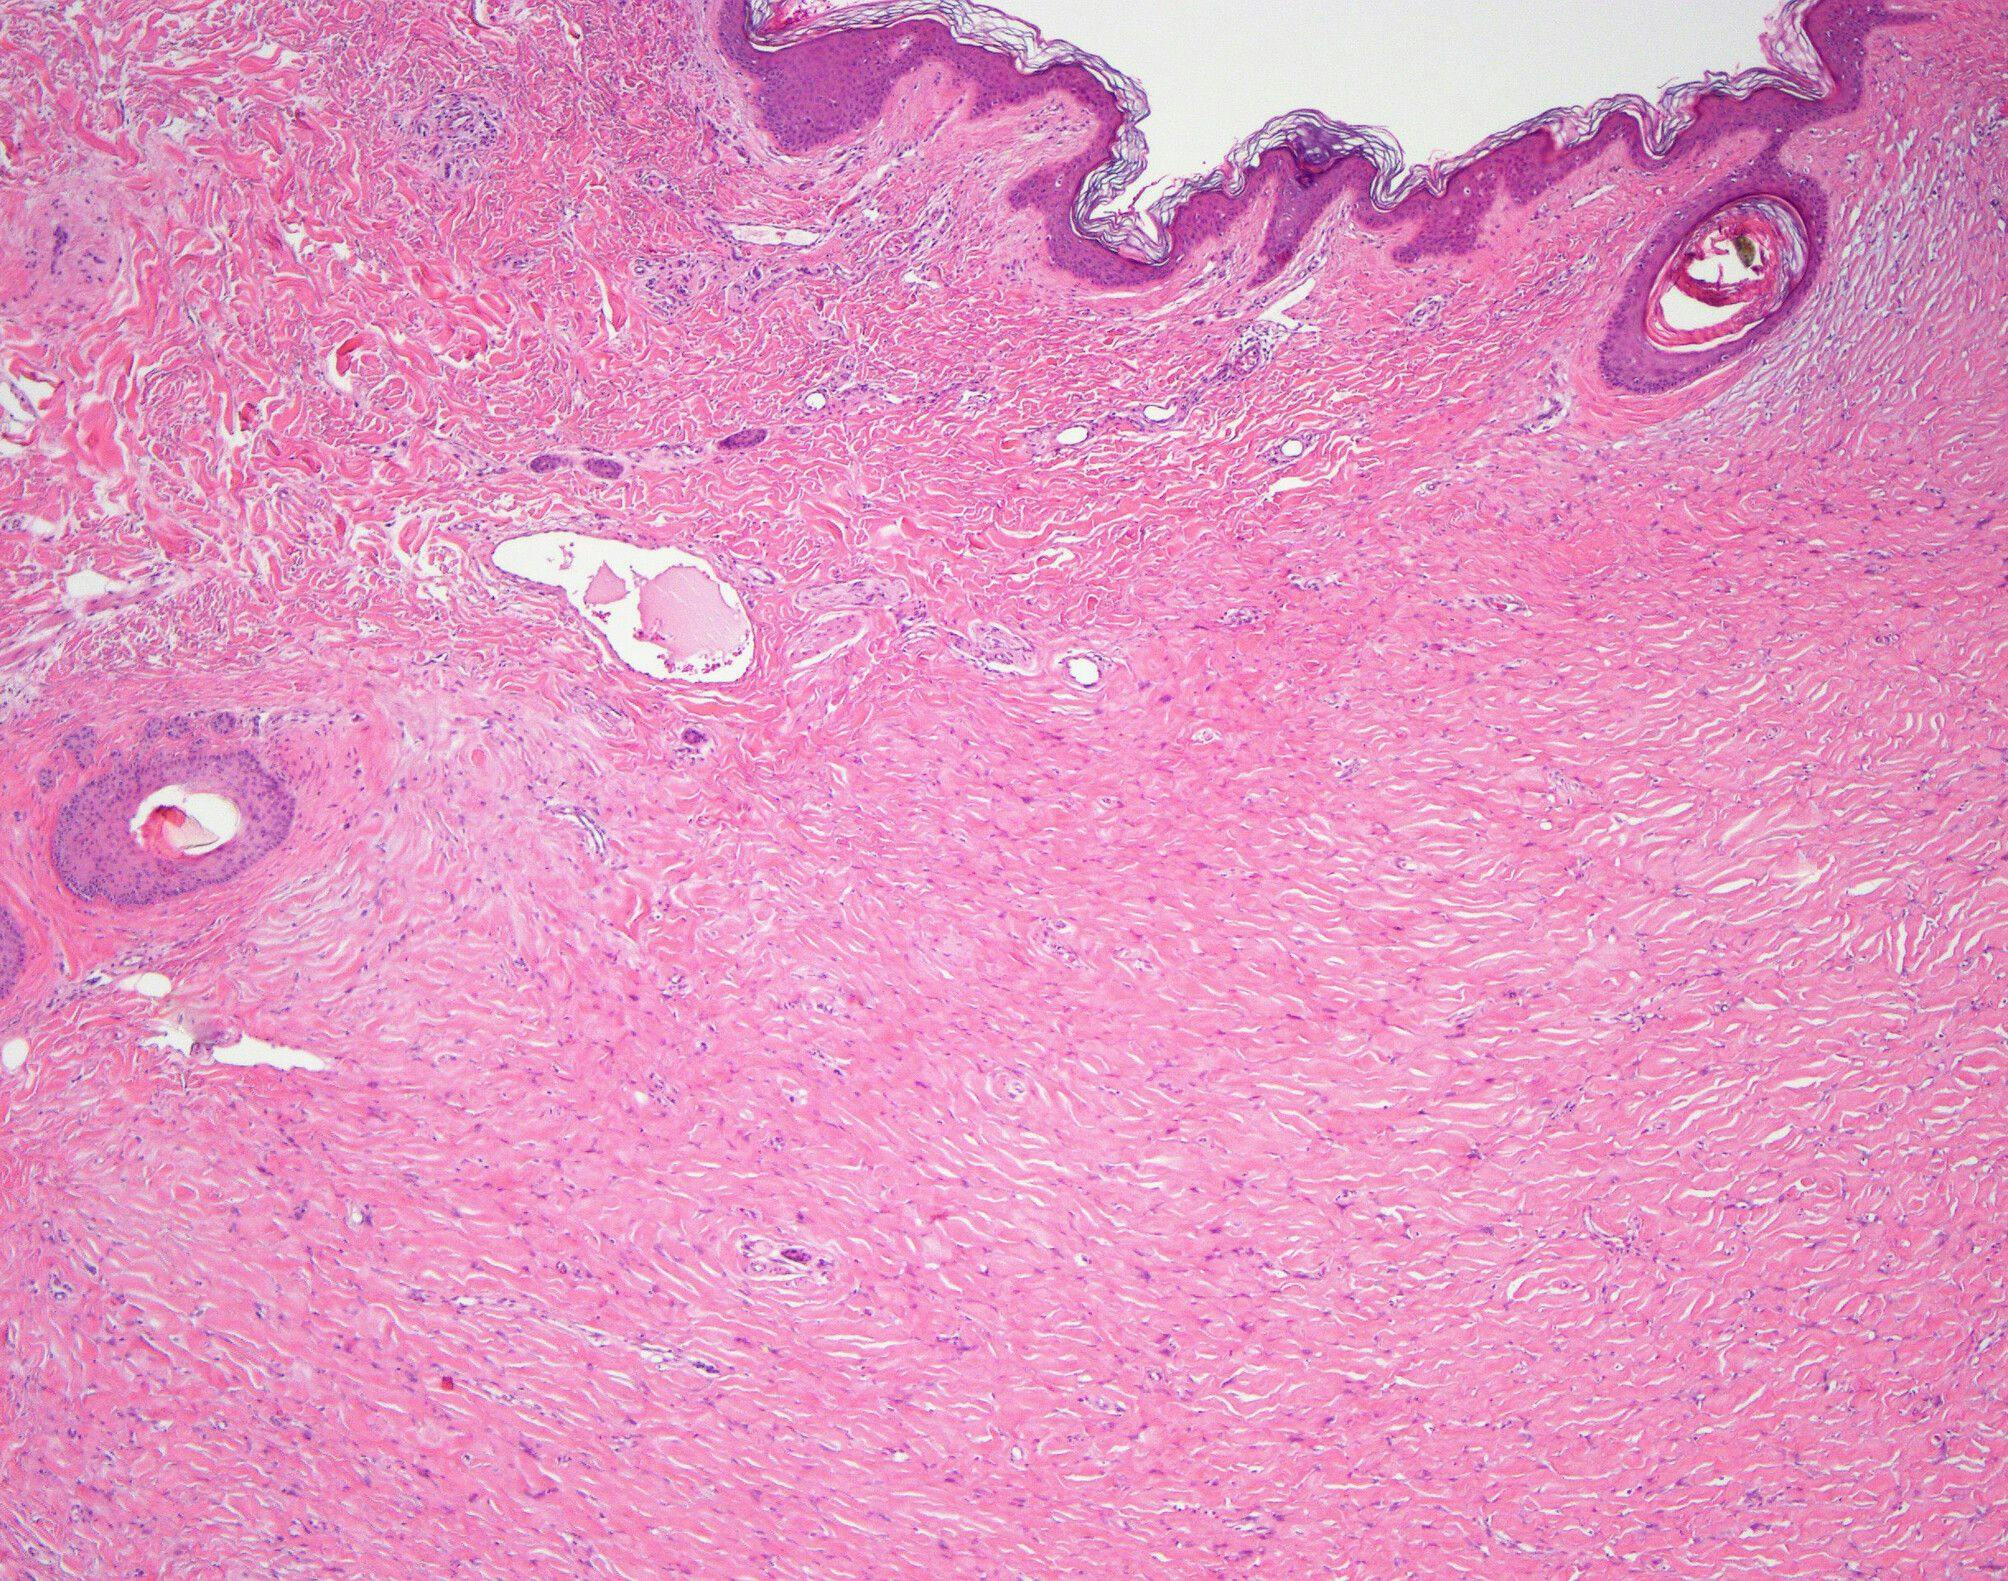 Giant cell collagenoma. Interface of the well-circumscribed, unencapsulated sclerotic spindle cell proliferation with normal collagen of dermis (H&E; ×40). Image courtesy of https://doi.org/10.1111/cup.14595